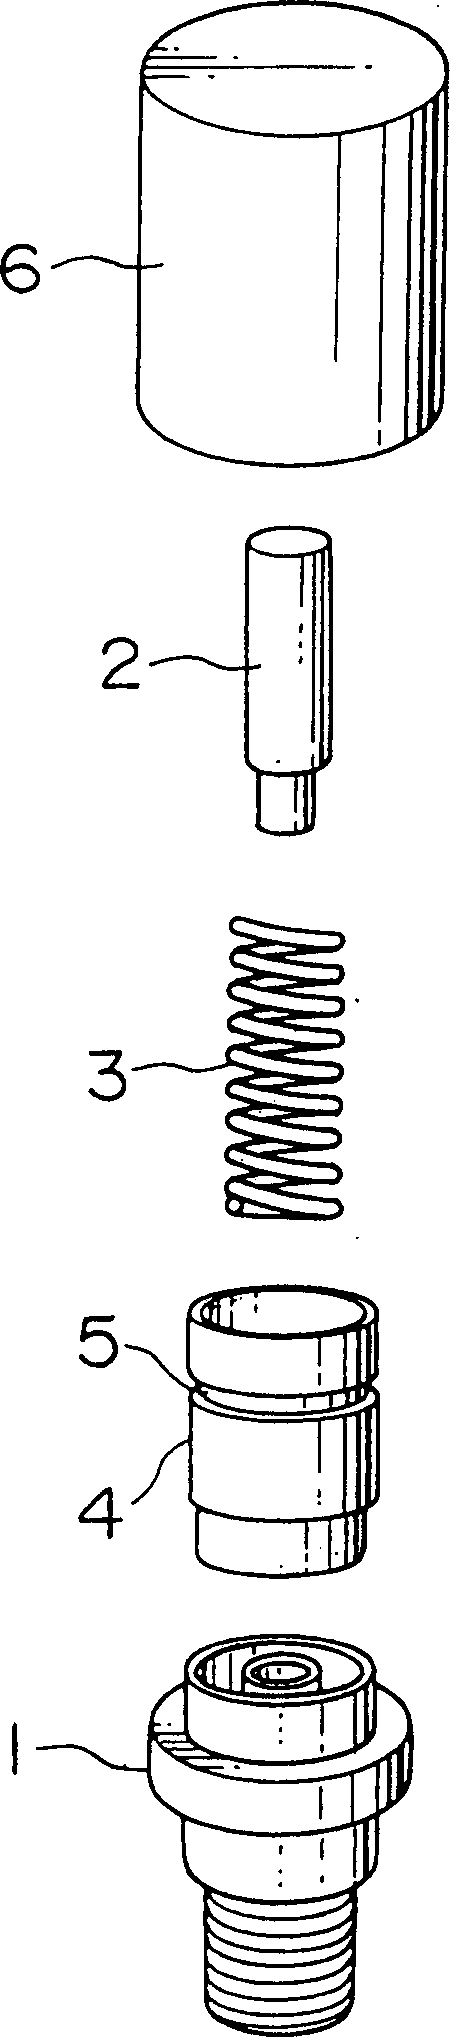 Helical double-resonance antenna capable of suppressing fluctuation of electric characteristics and without limit of size of helical coil